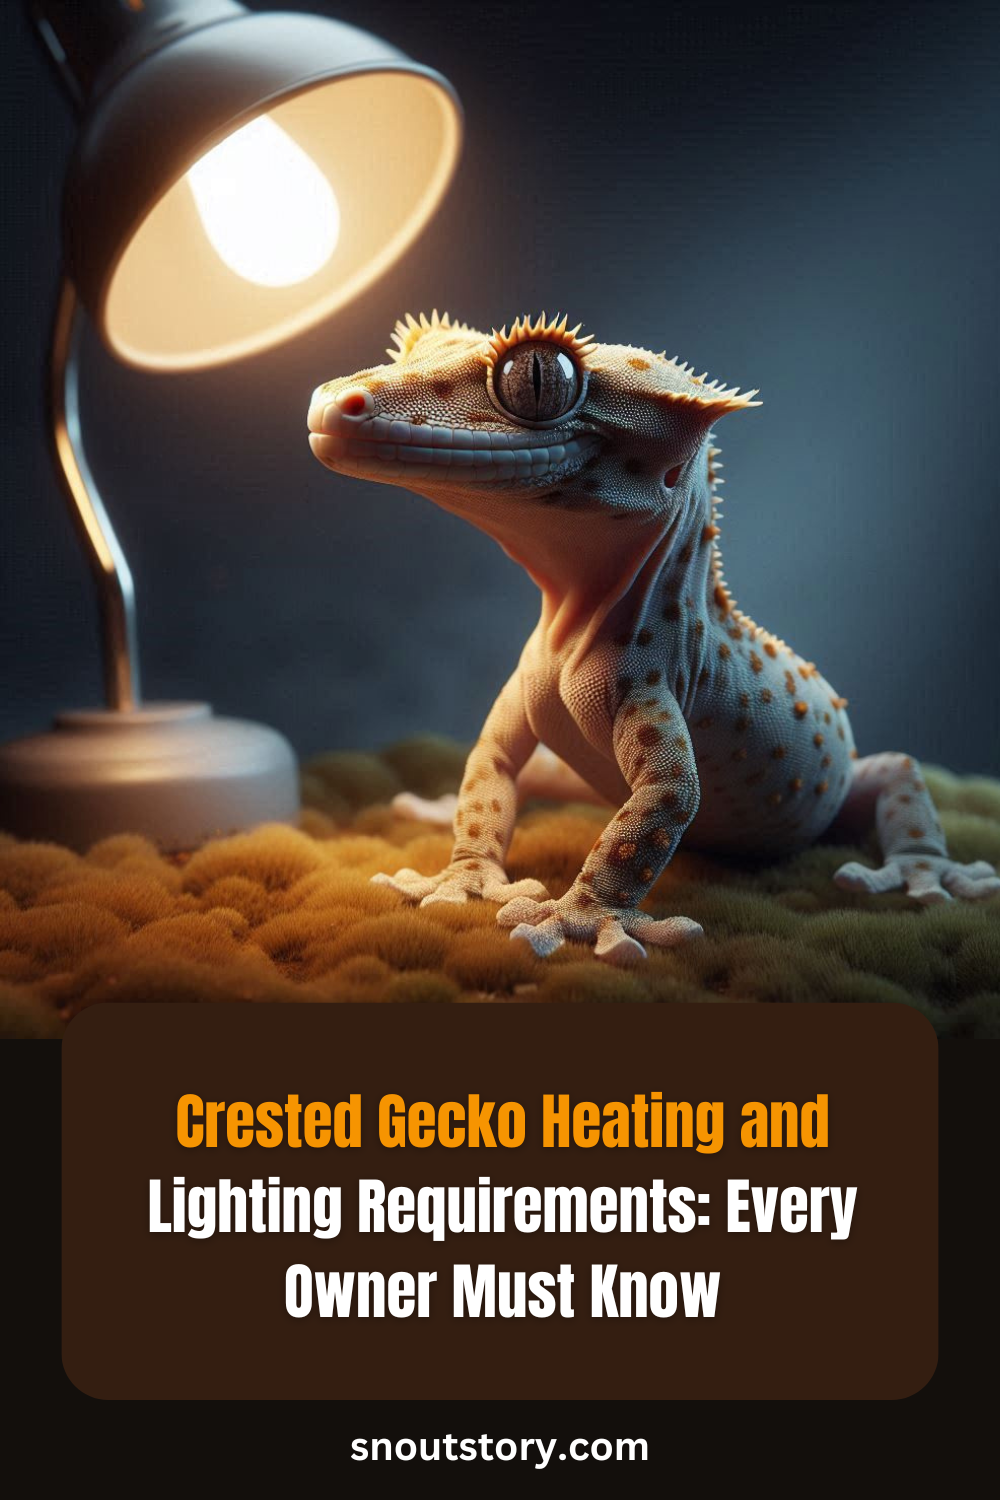 Crested Gecko Heating and Lighting Requirements: Every Owner Must Know